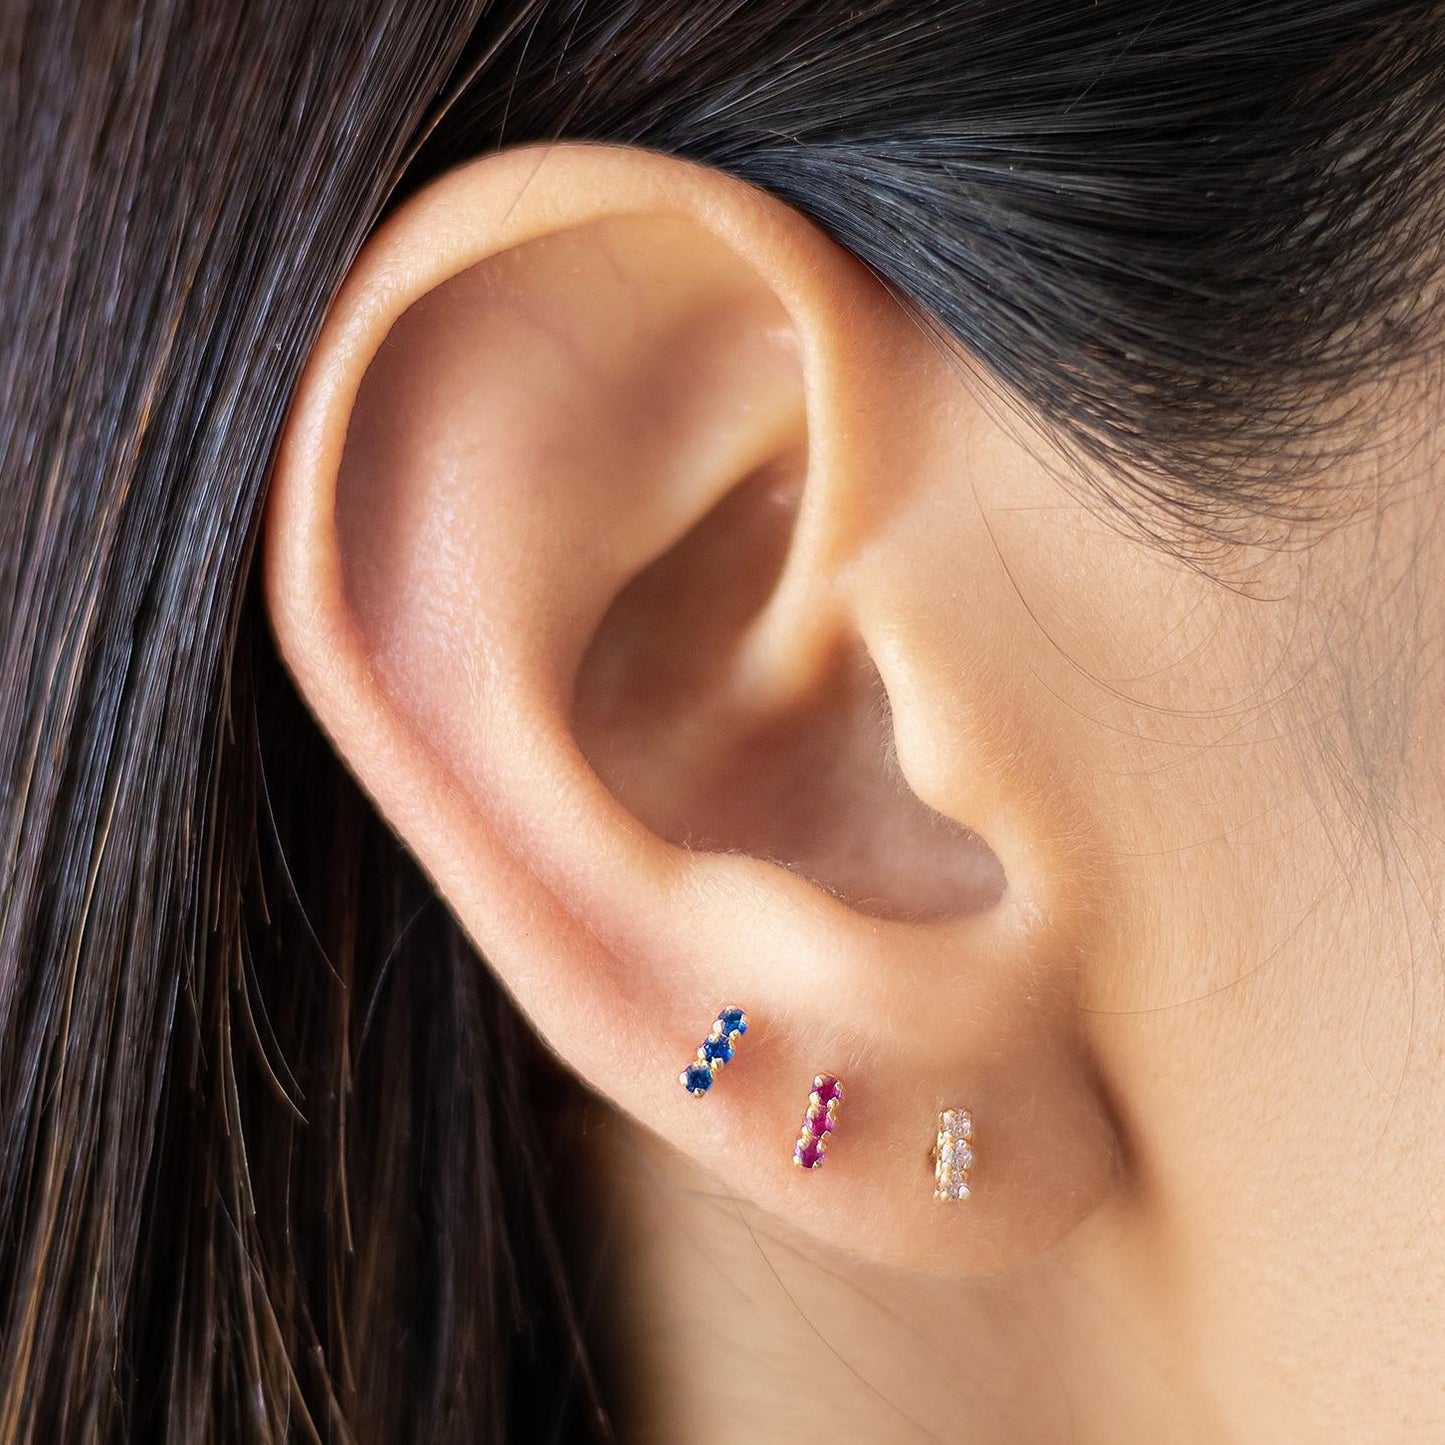 These bar earrings are a simple and elegant way to add some zing to your look. Dress up your outfit for the day, or pair with a pair of jeans for a night out with friends. They go with everything!